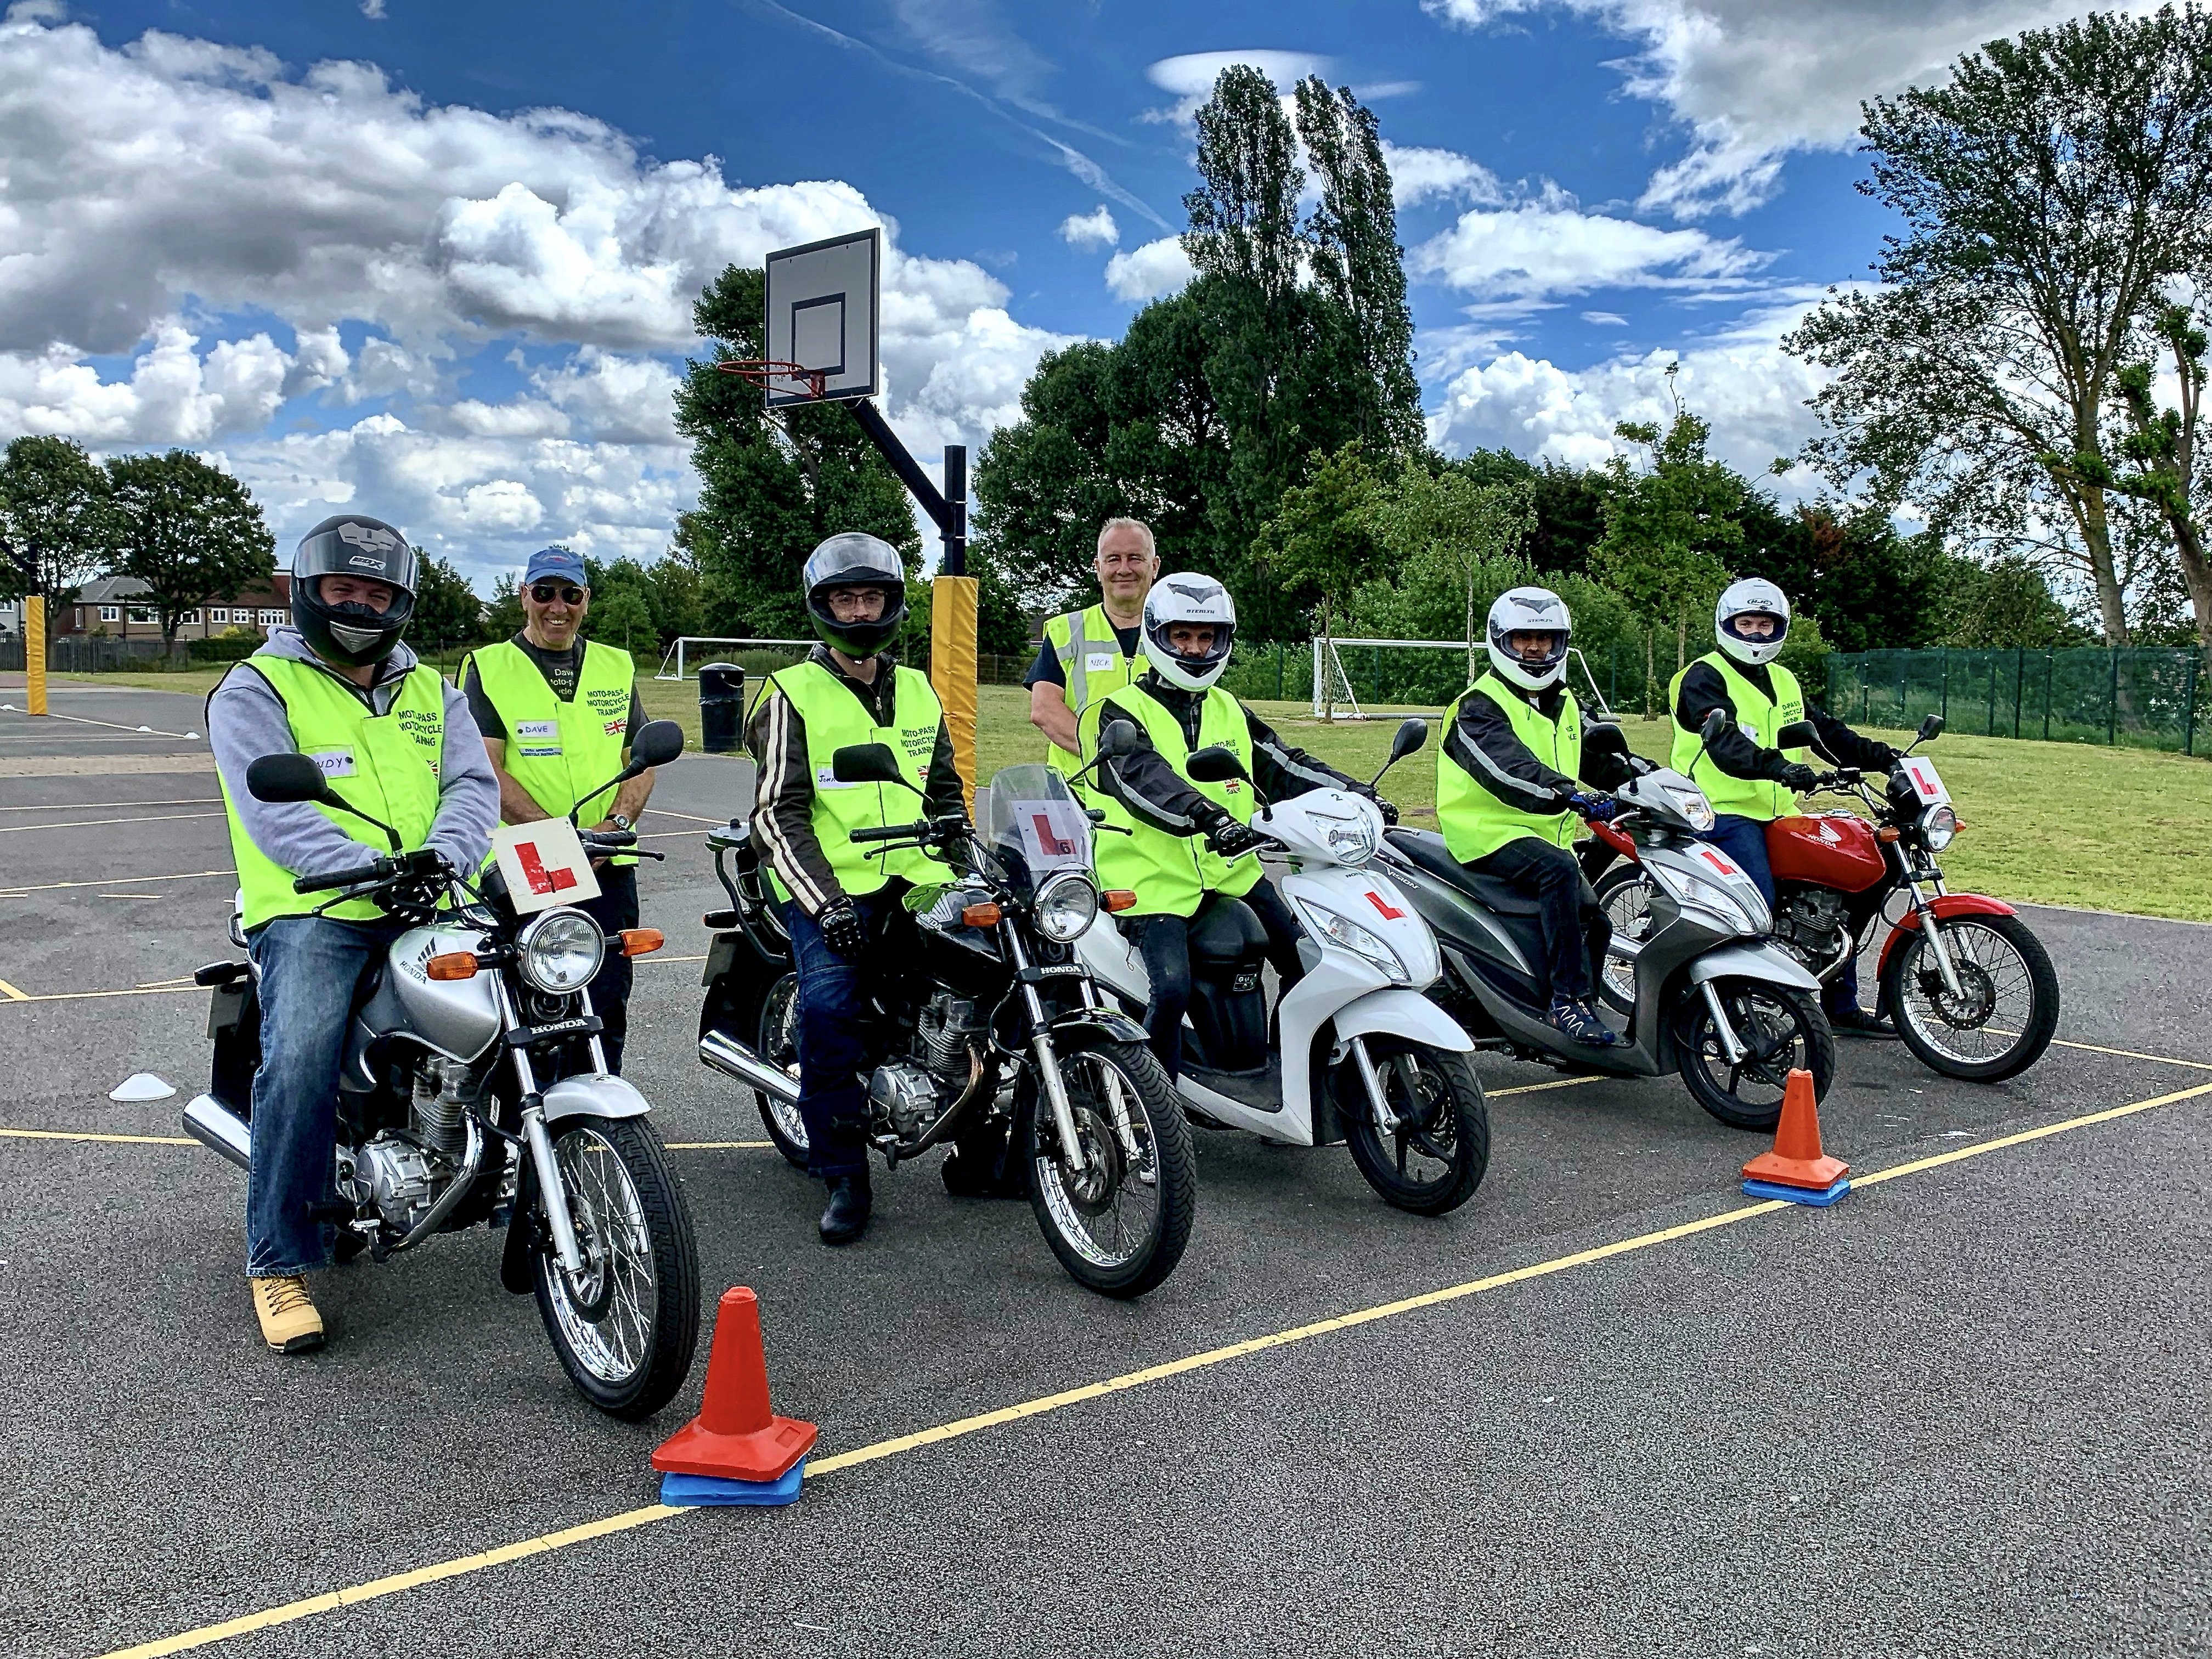 Moto Pass Motorcycle Training Ltd in Welling